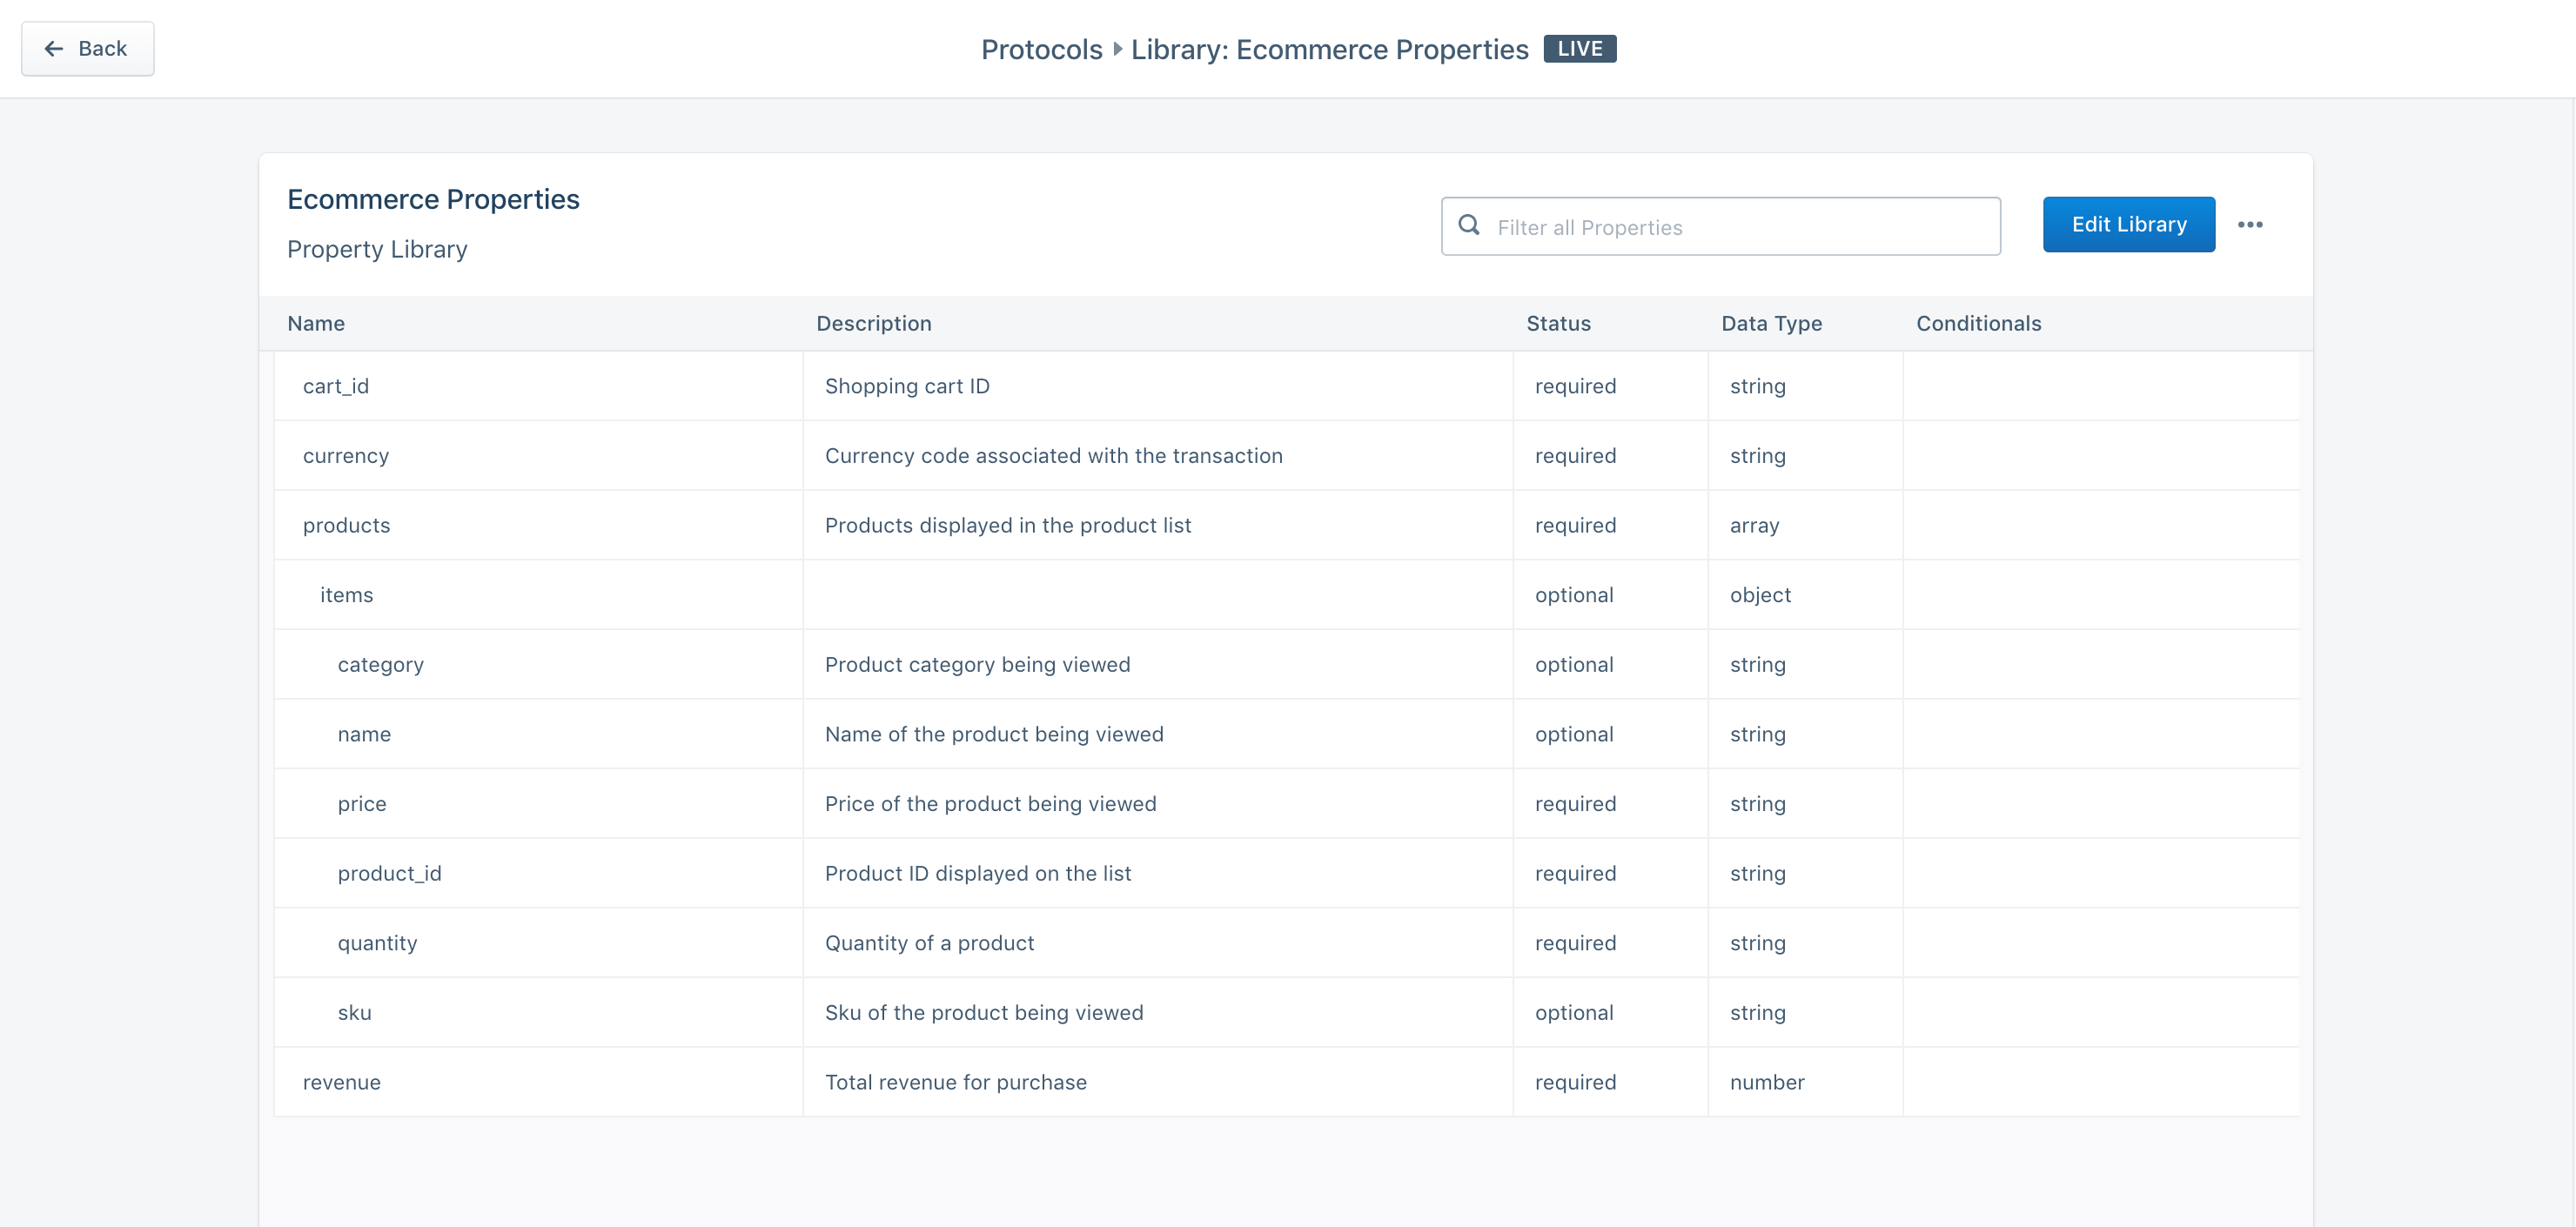 Screenshot of the Ecommerce Properties Library.